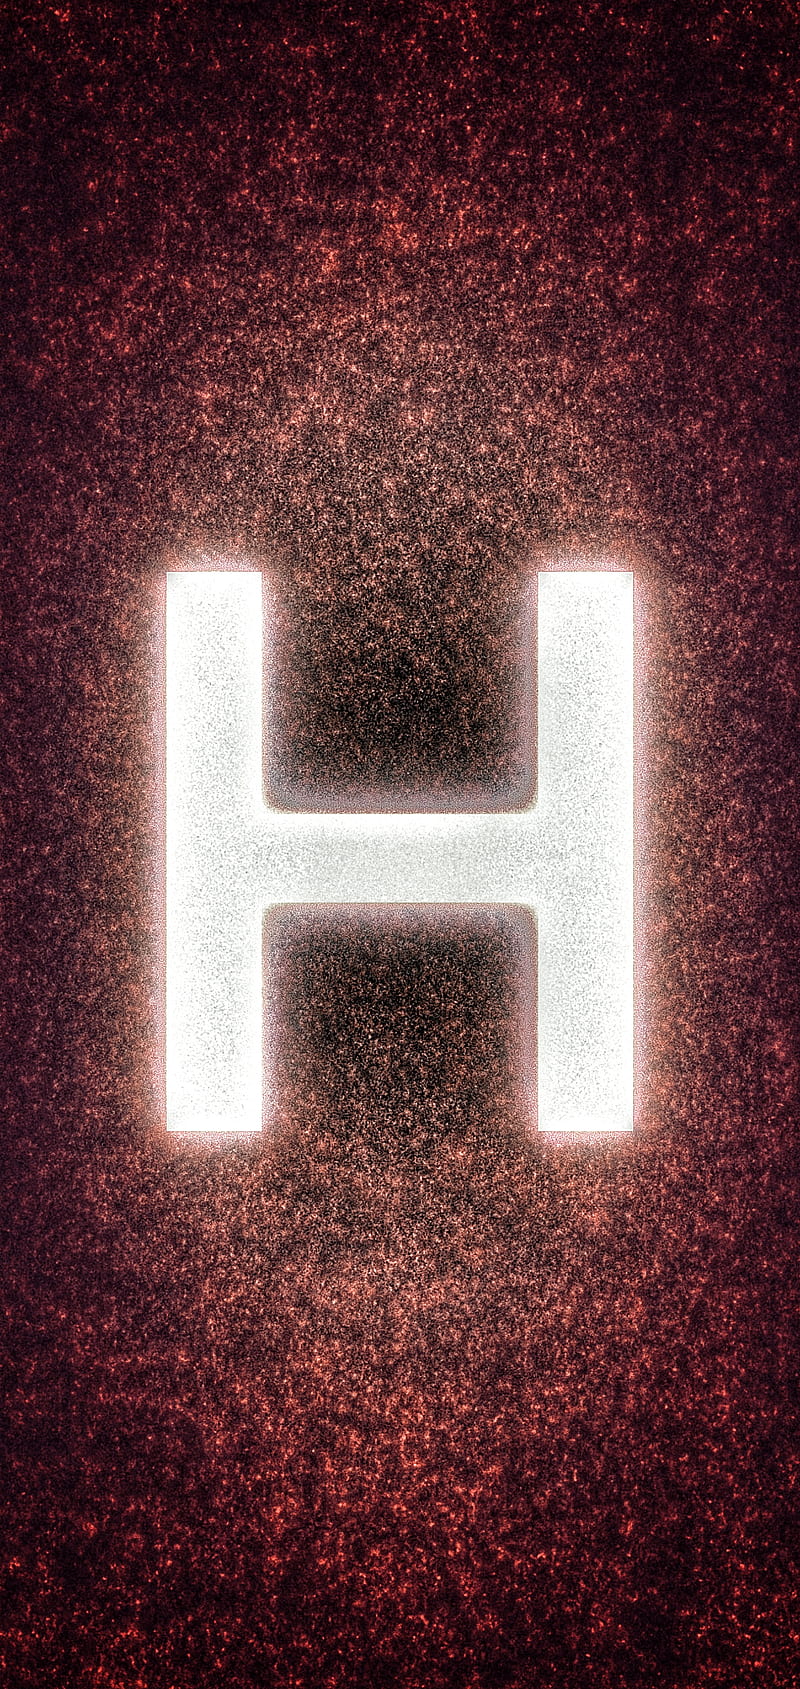 H style, h letter, HD phone wallpaper